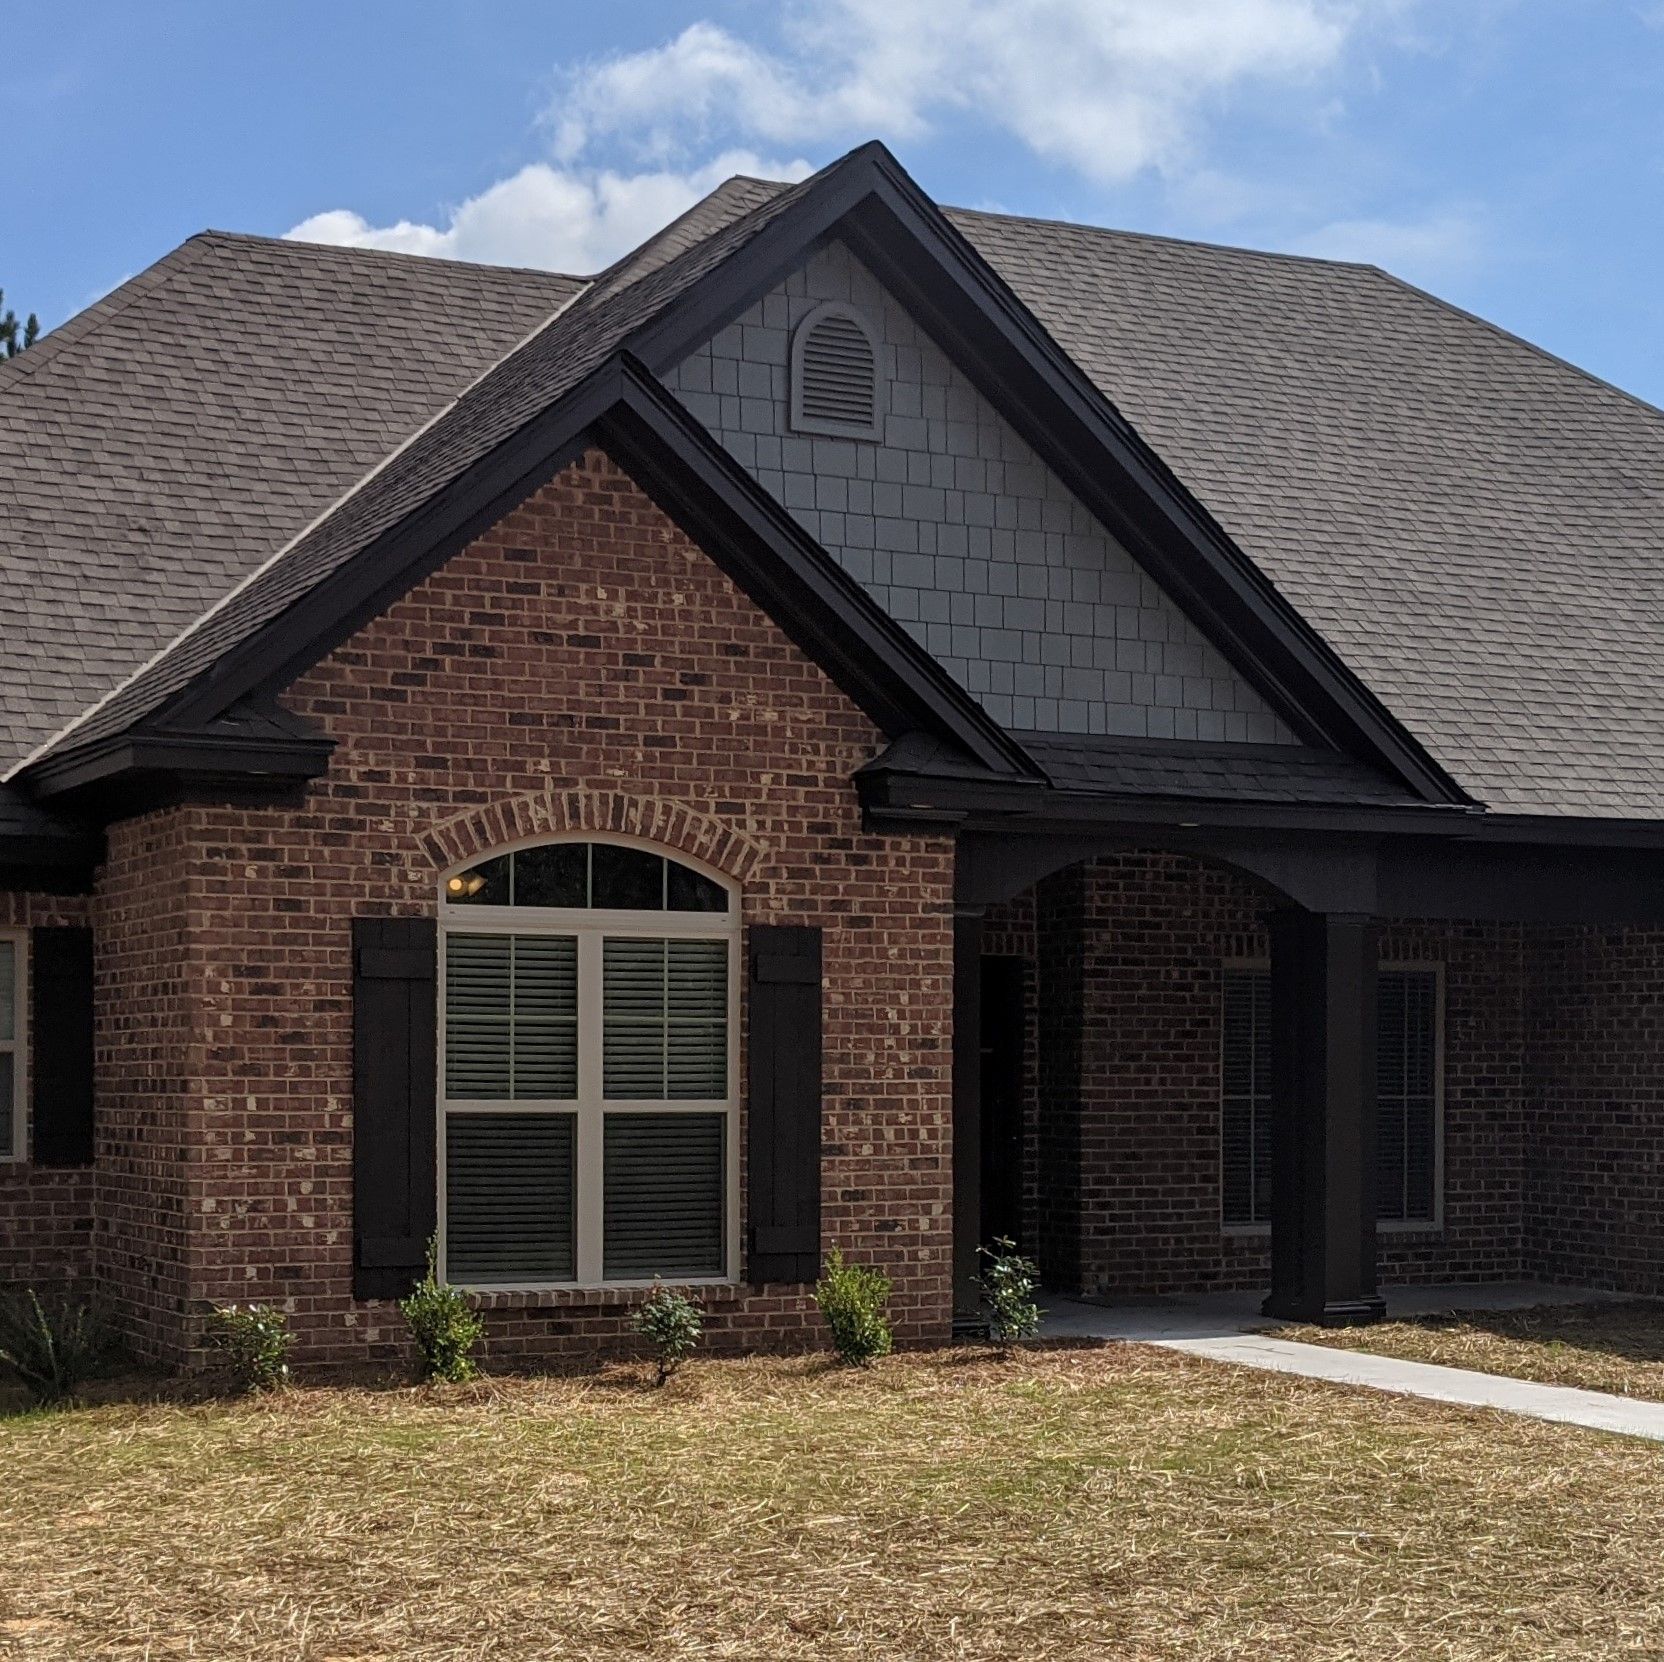 Top Energy savings heat rejection and bright glare reduction all began immediately after SPF Residential Tint was professionally installed in Wetumpka AL